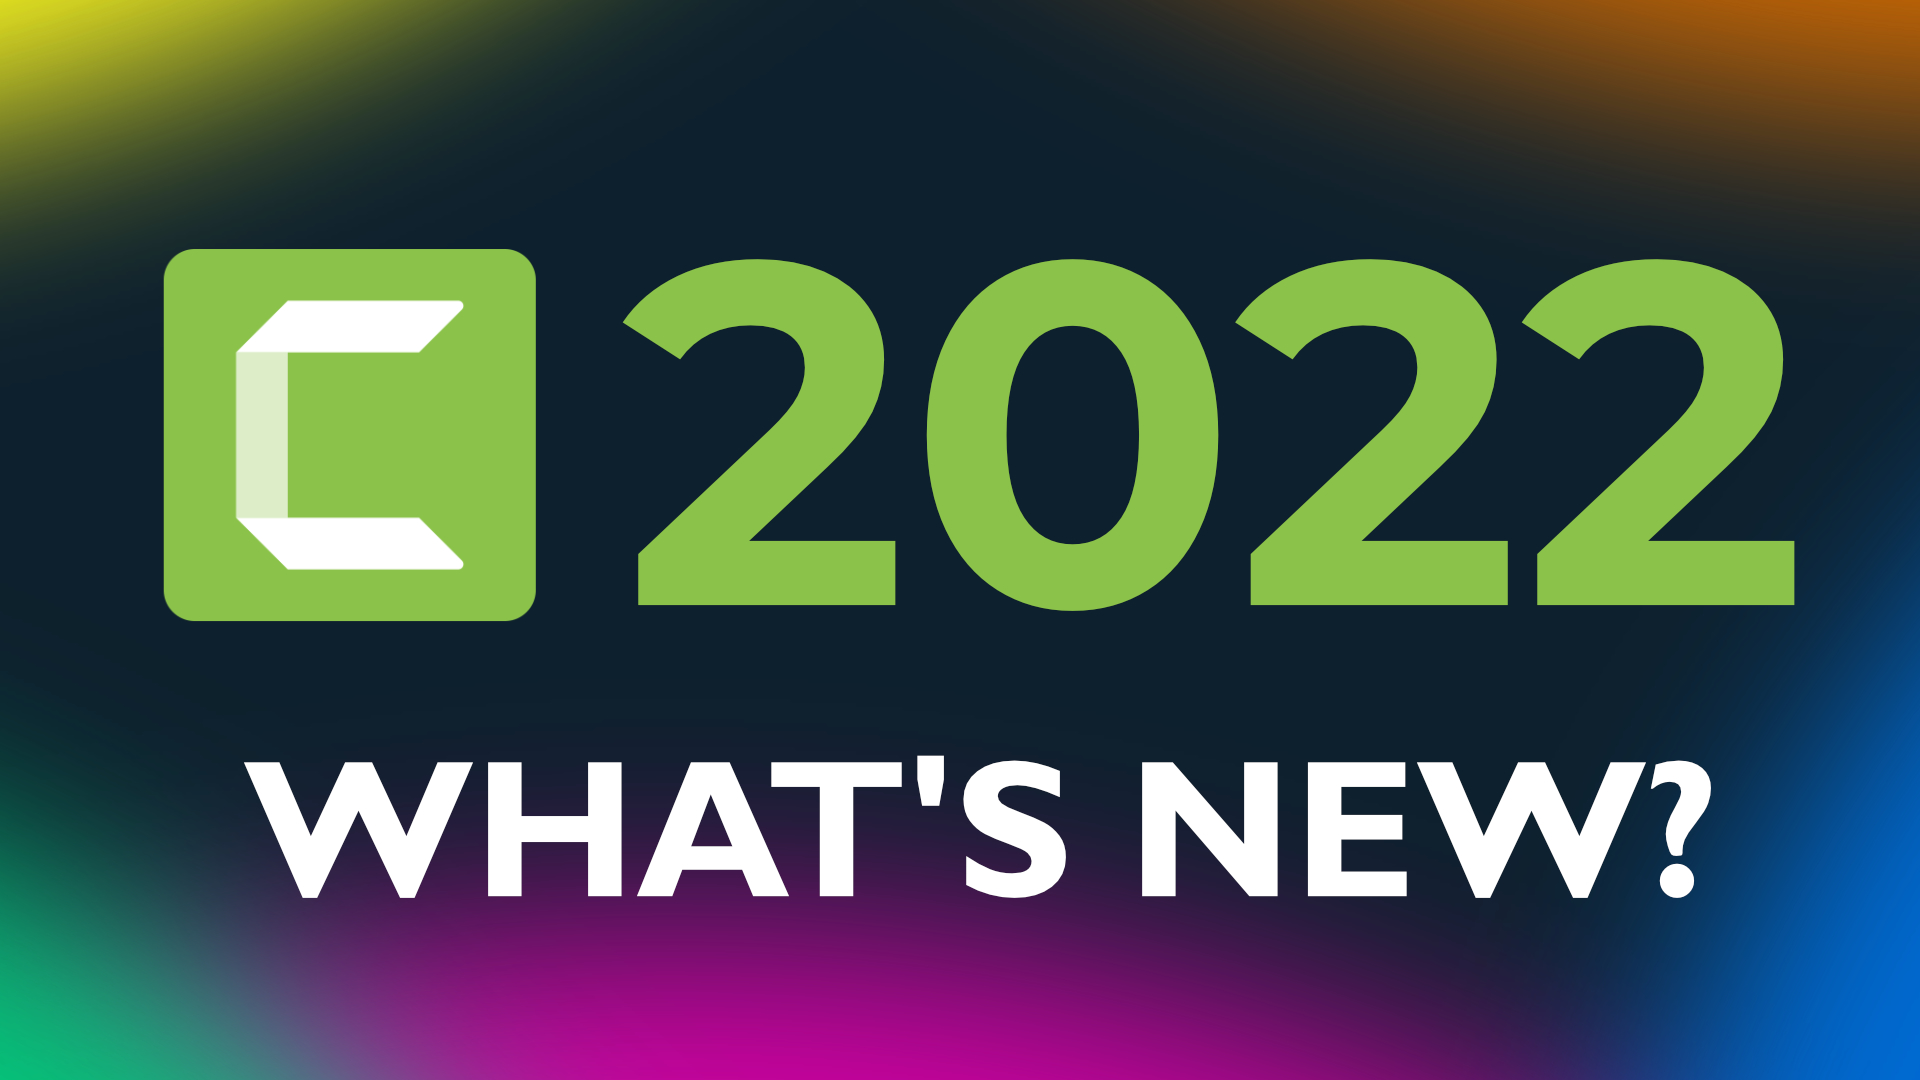 Camtasia 2022: What's New?